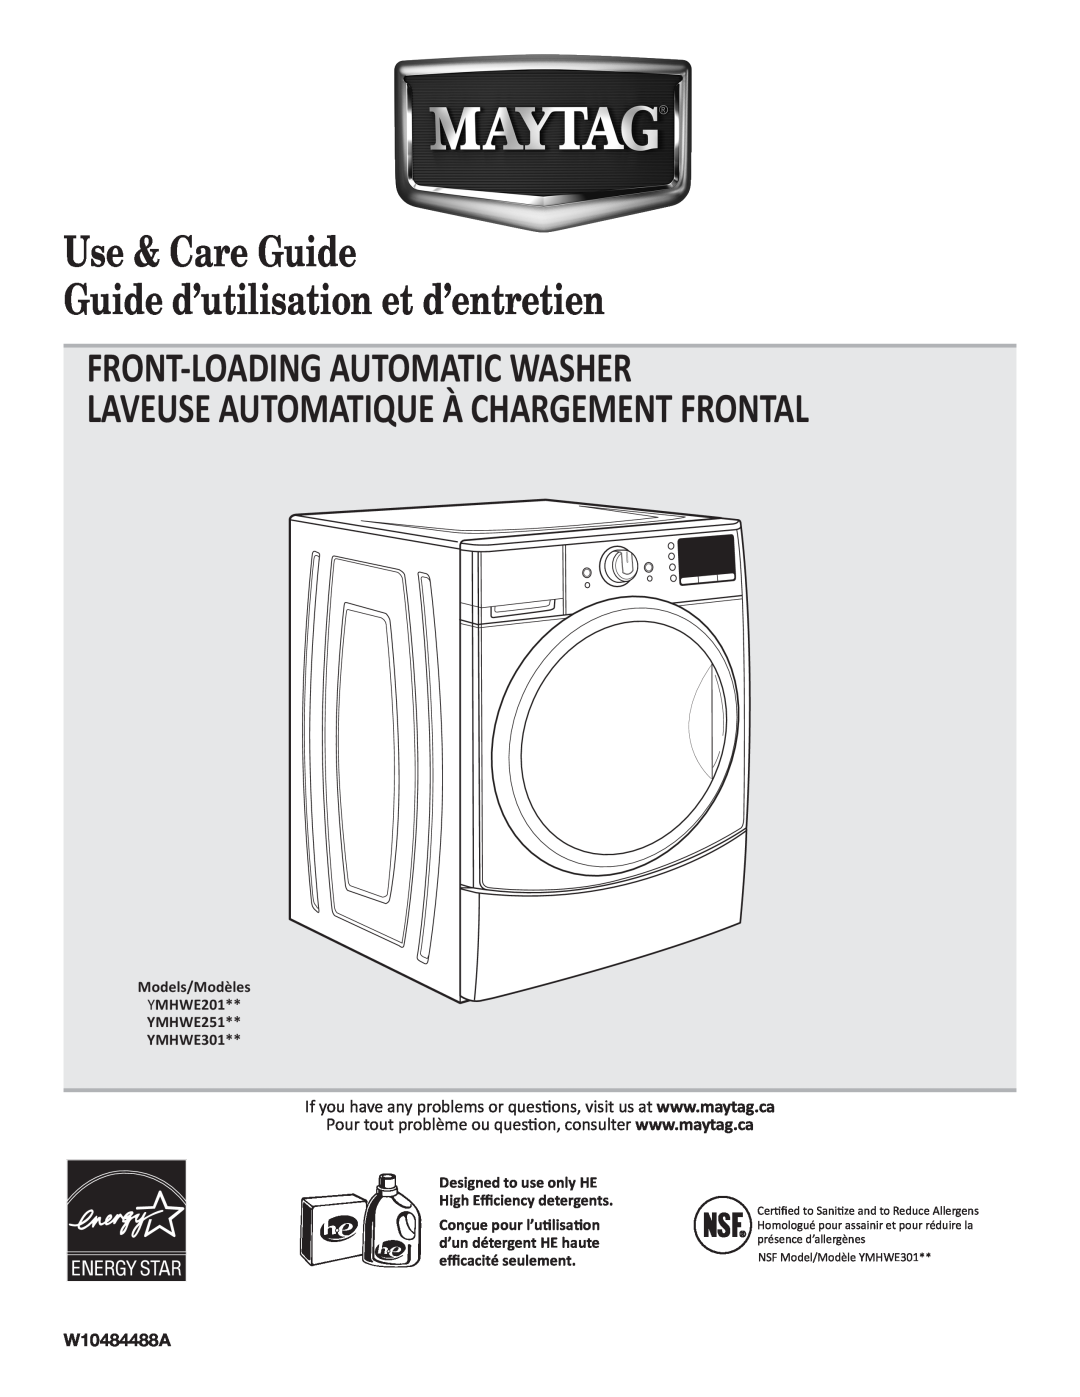 Maytag YMHWE301 manual W10484488A, Use & Care Guide Guide d’utilisation et d’entretien, Front-Loading Automatic Washer 